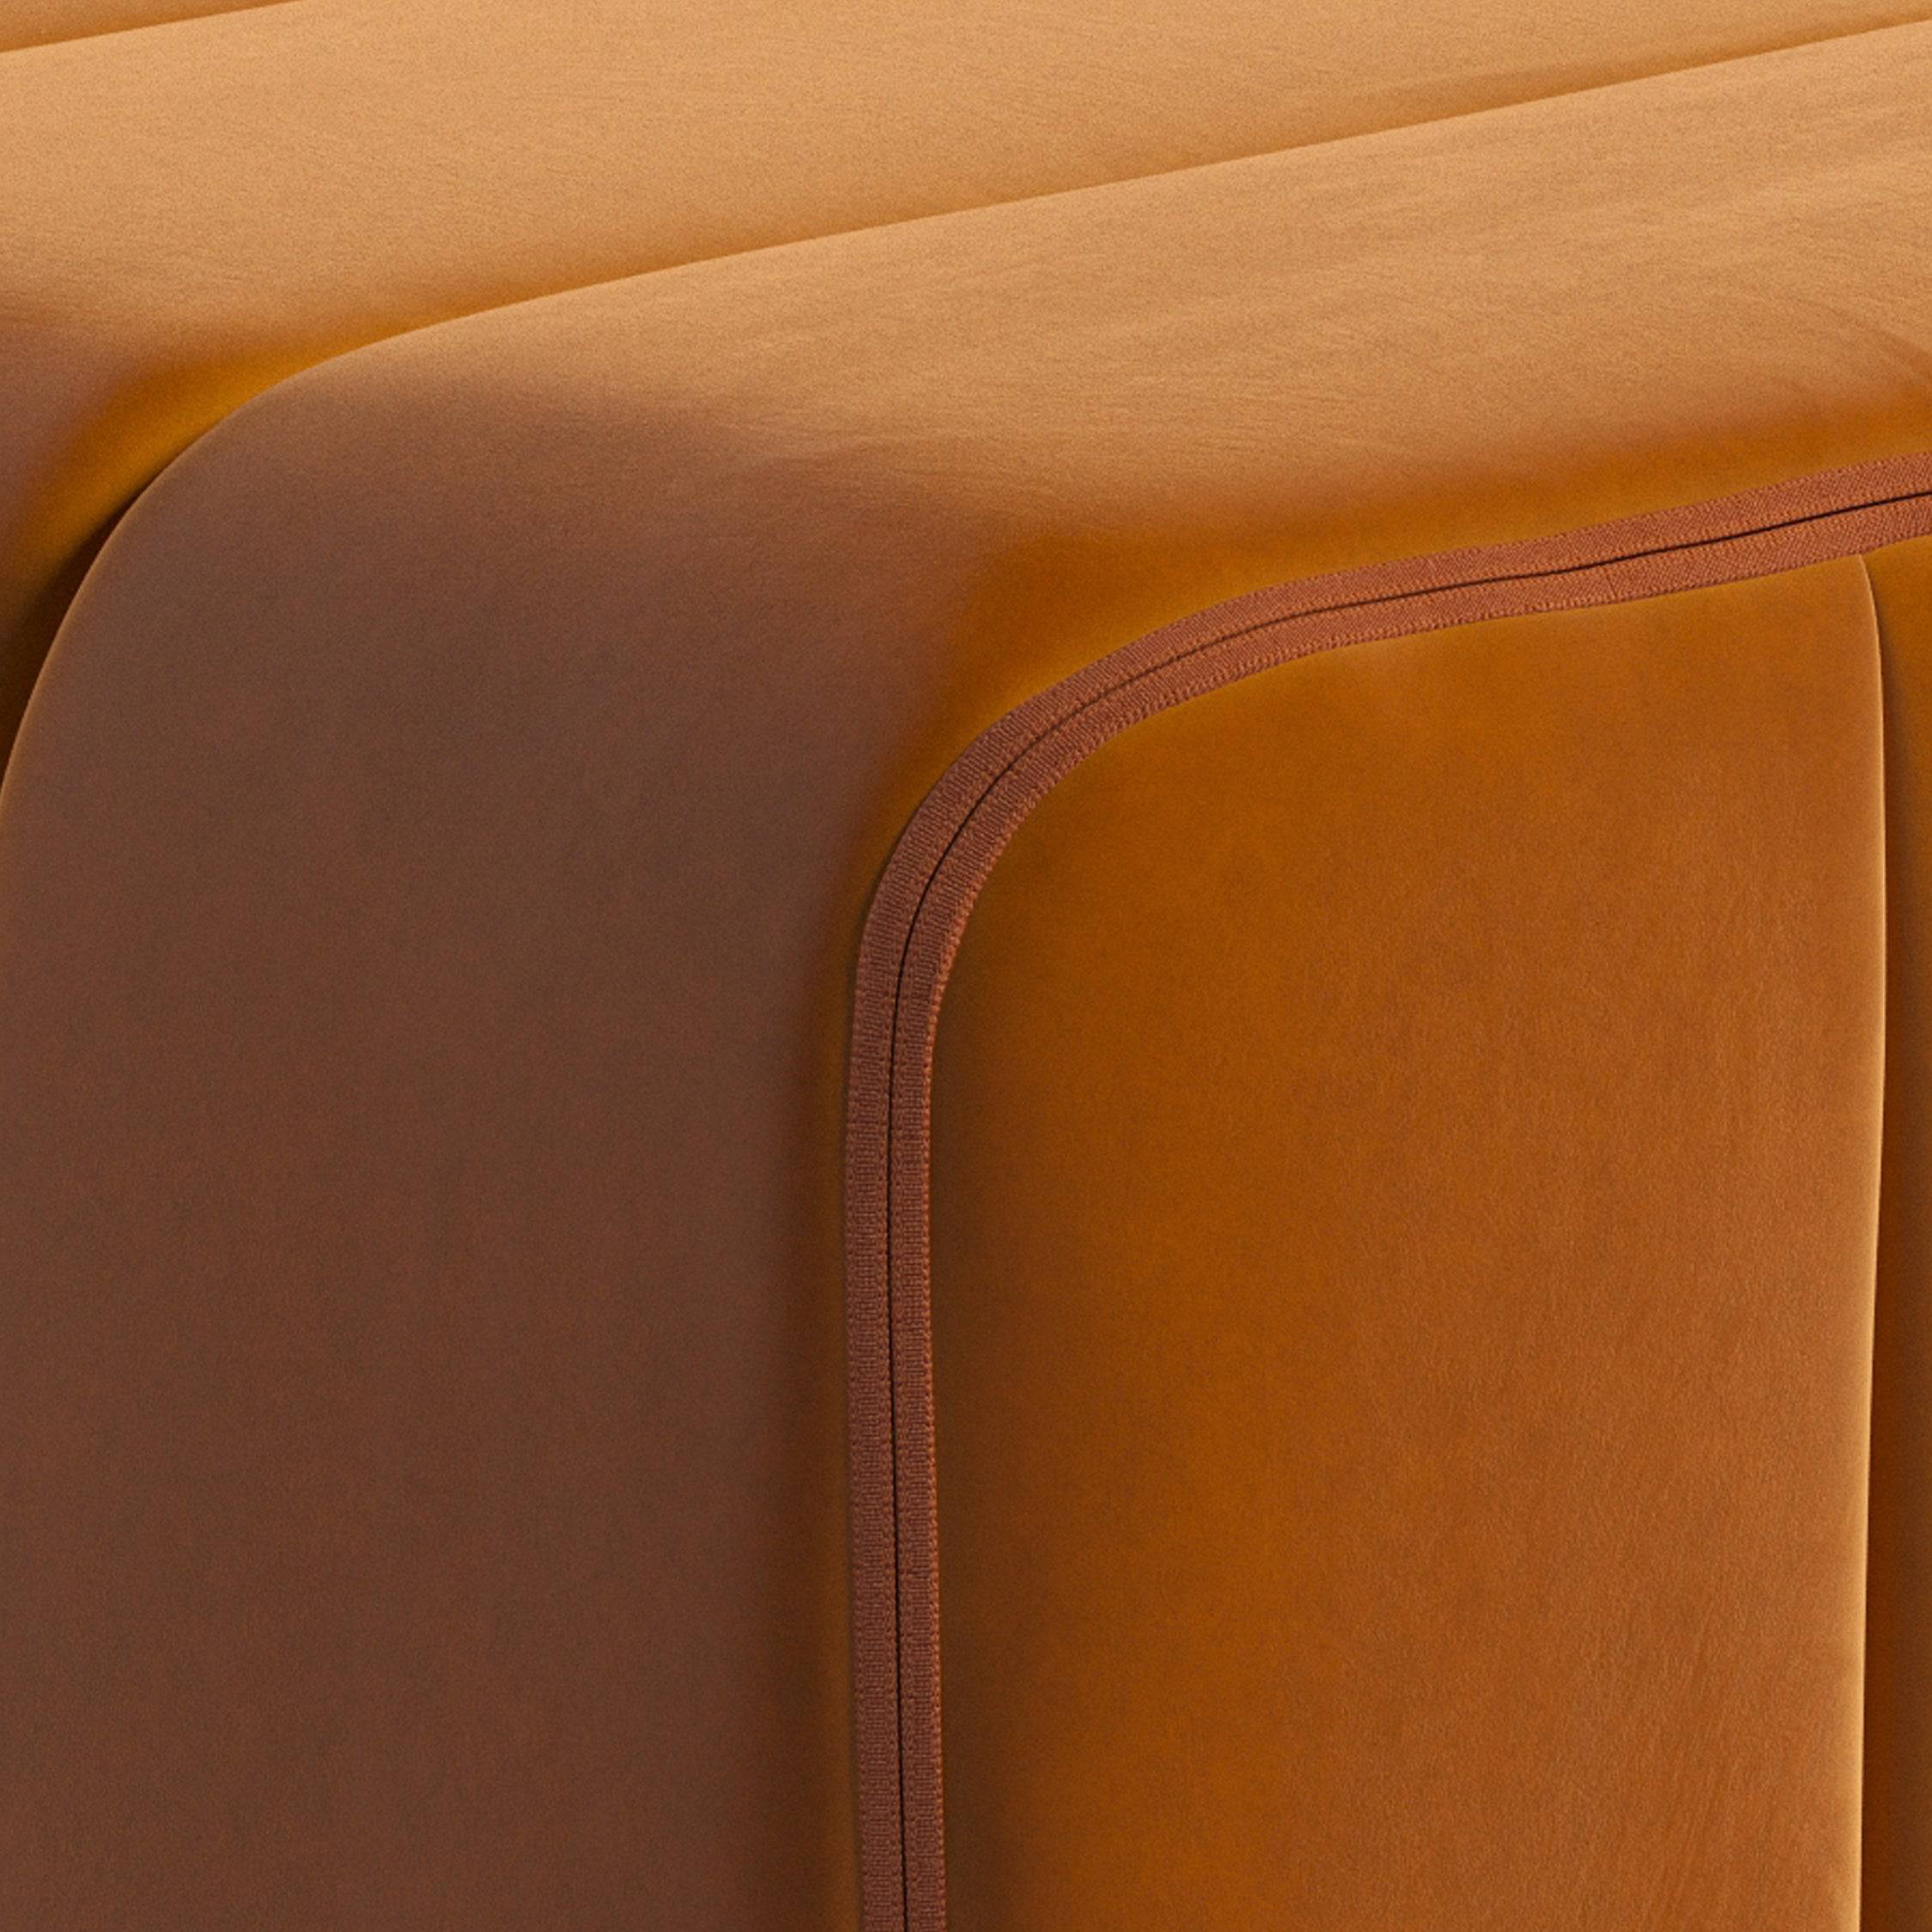 Curt Sofa System - Russet - THAT COOL LIVING